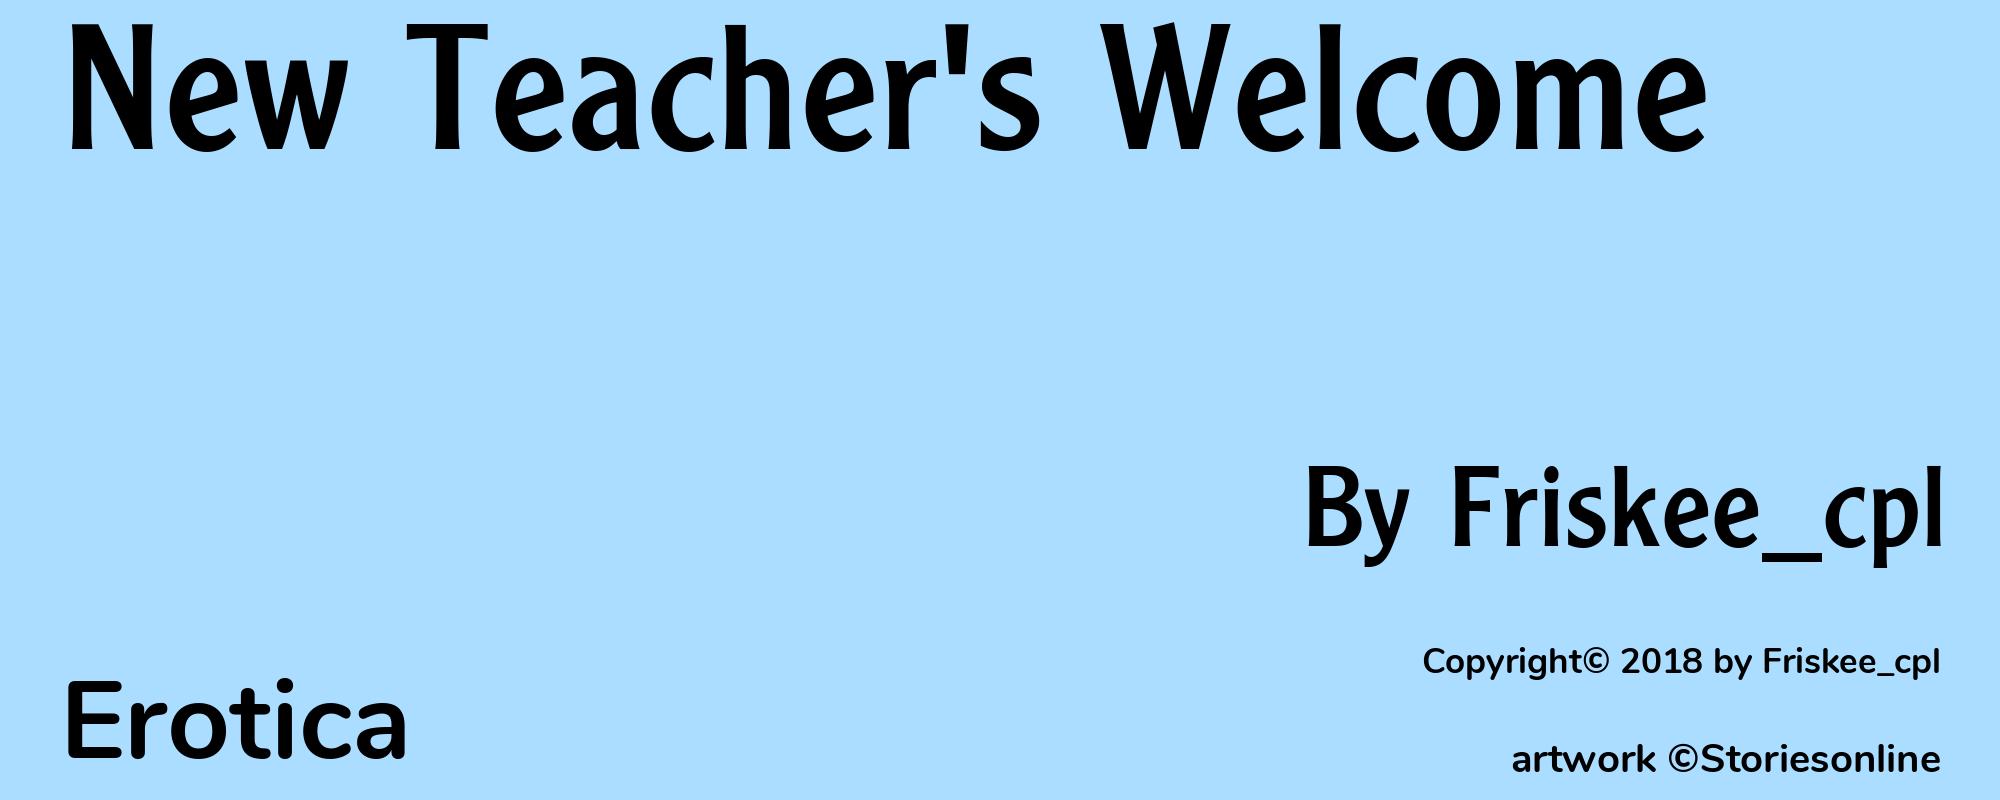 New Teacher's Welcome - Cover